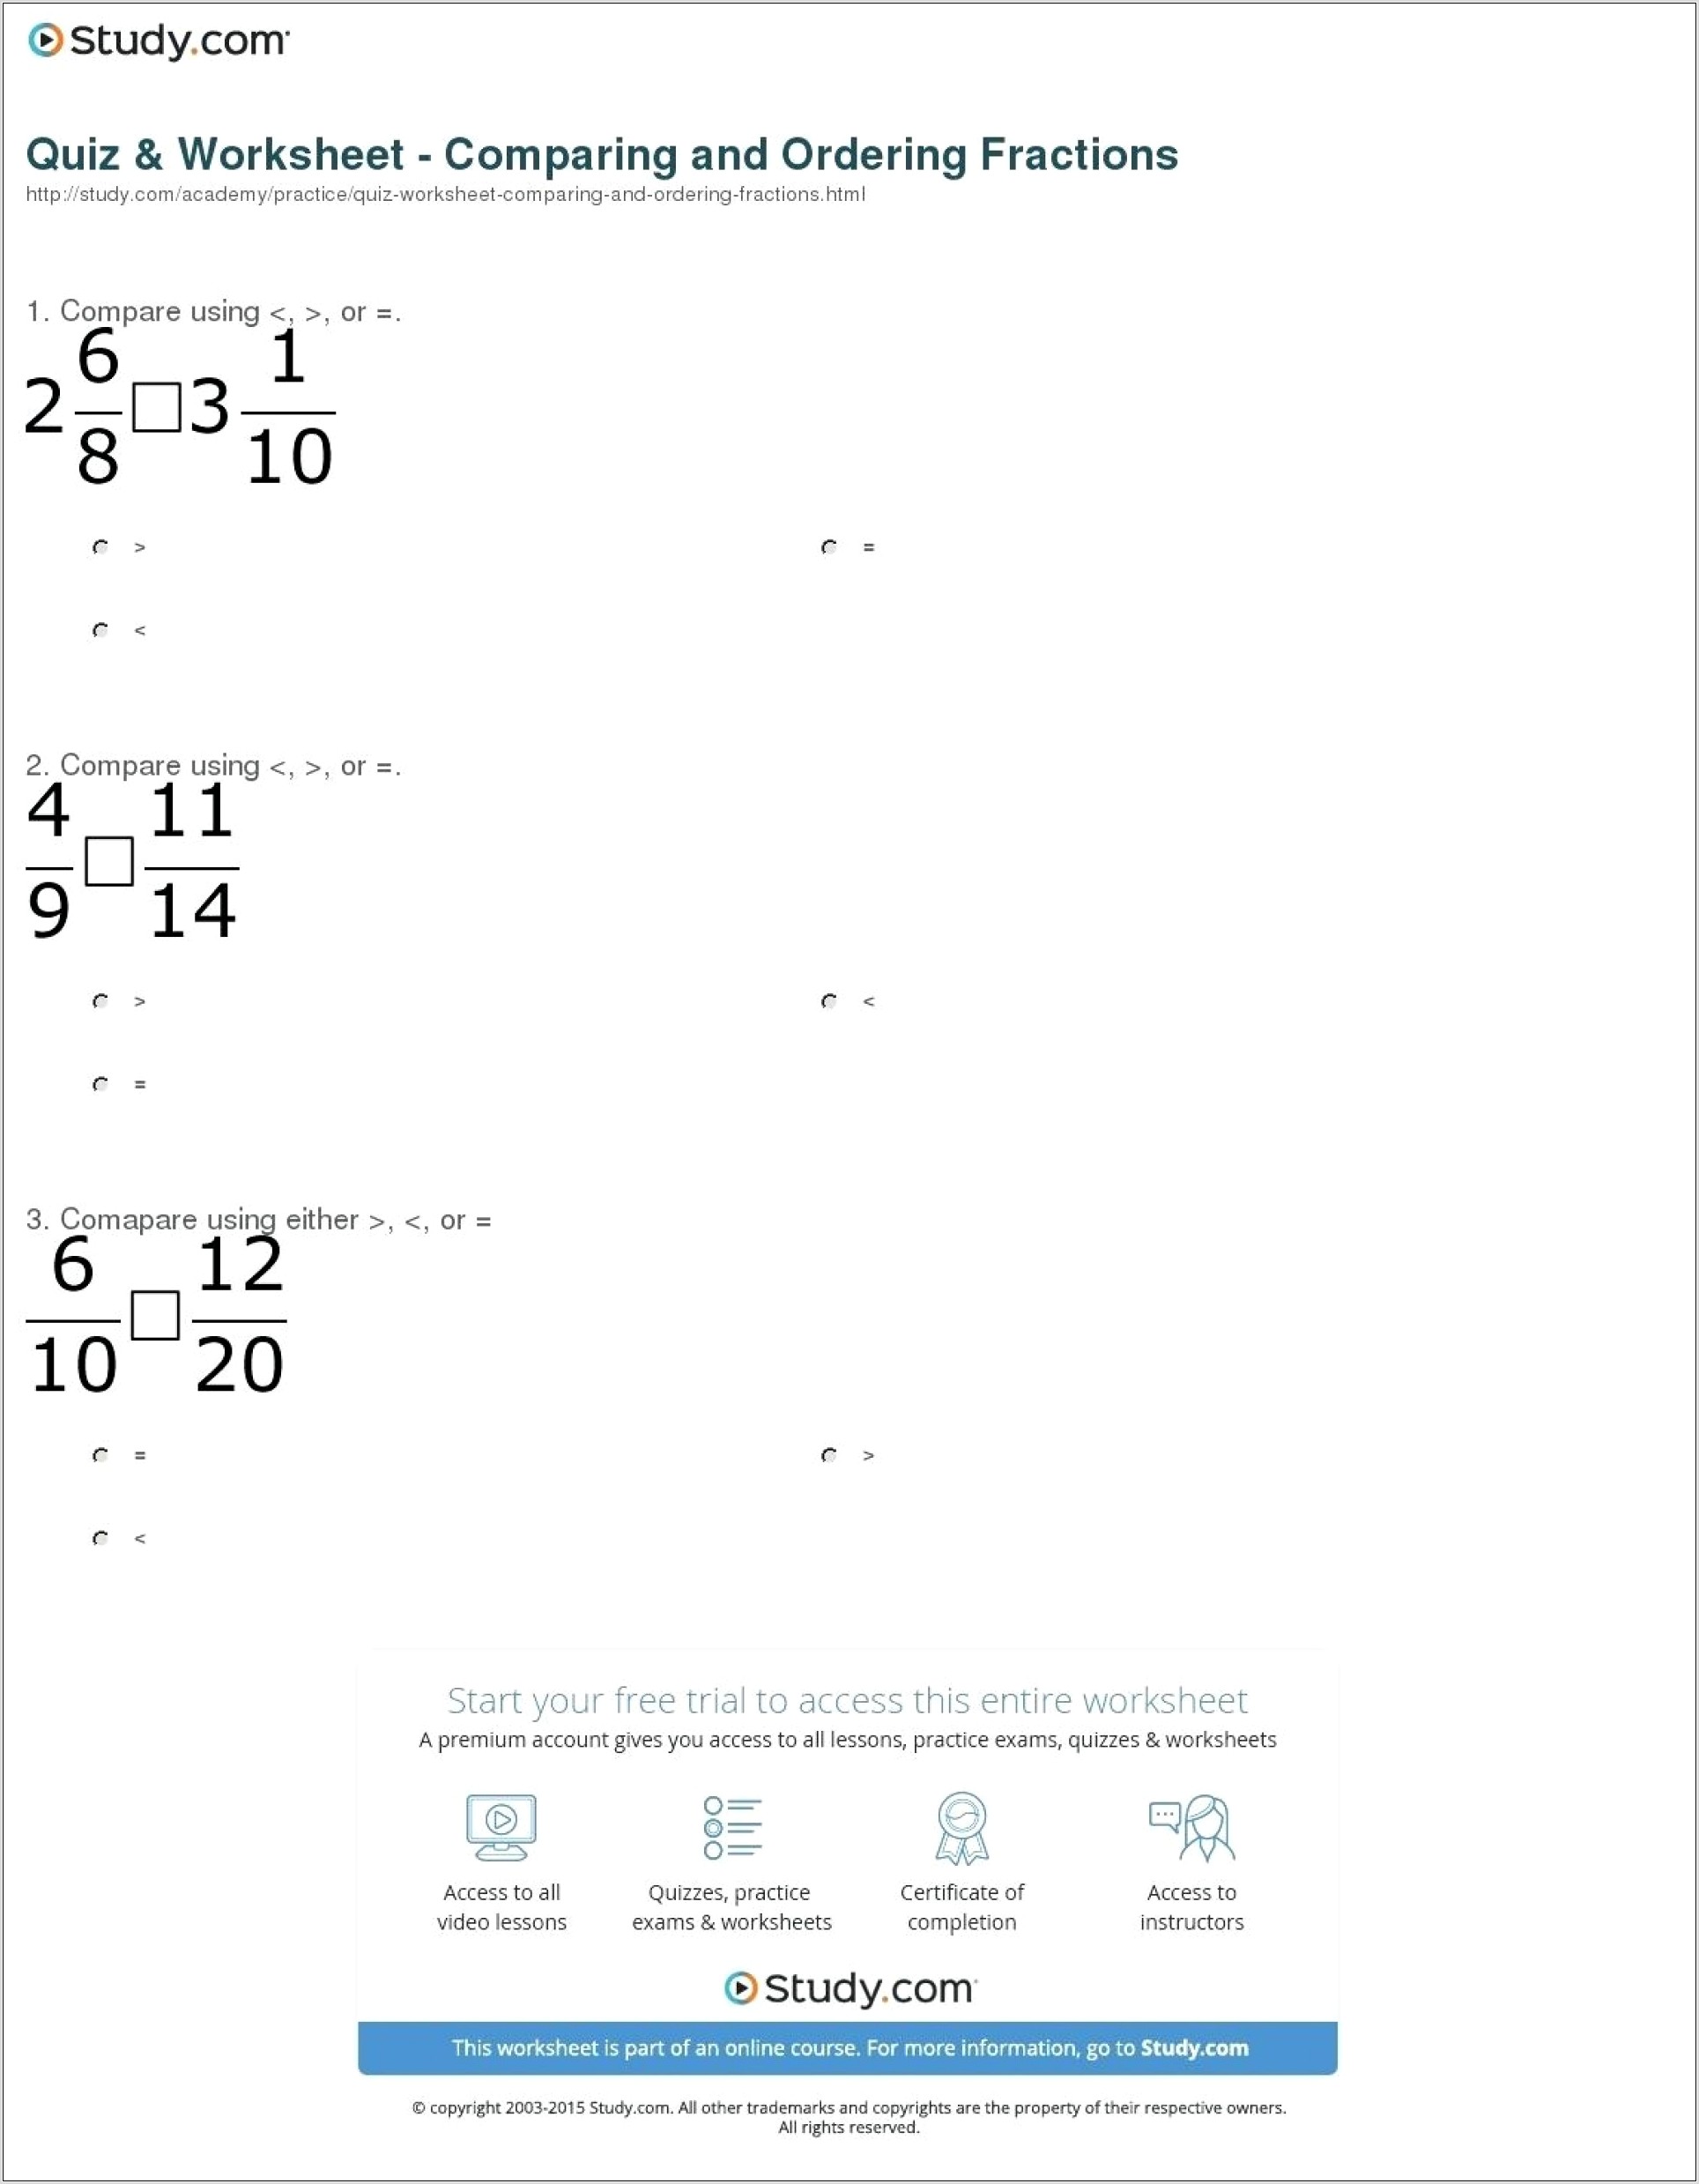 Worksheet For Ordering Fractions With Different Denominators